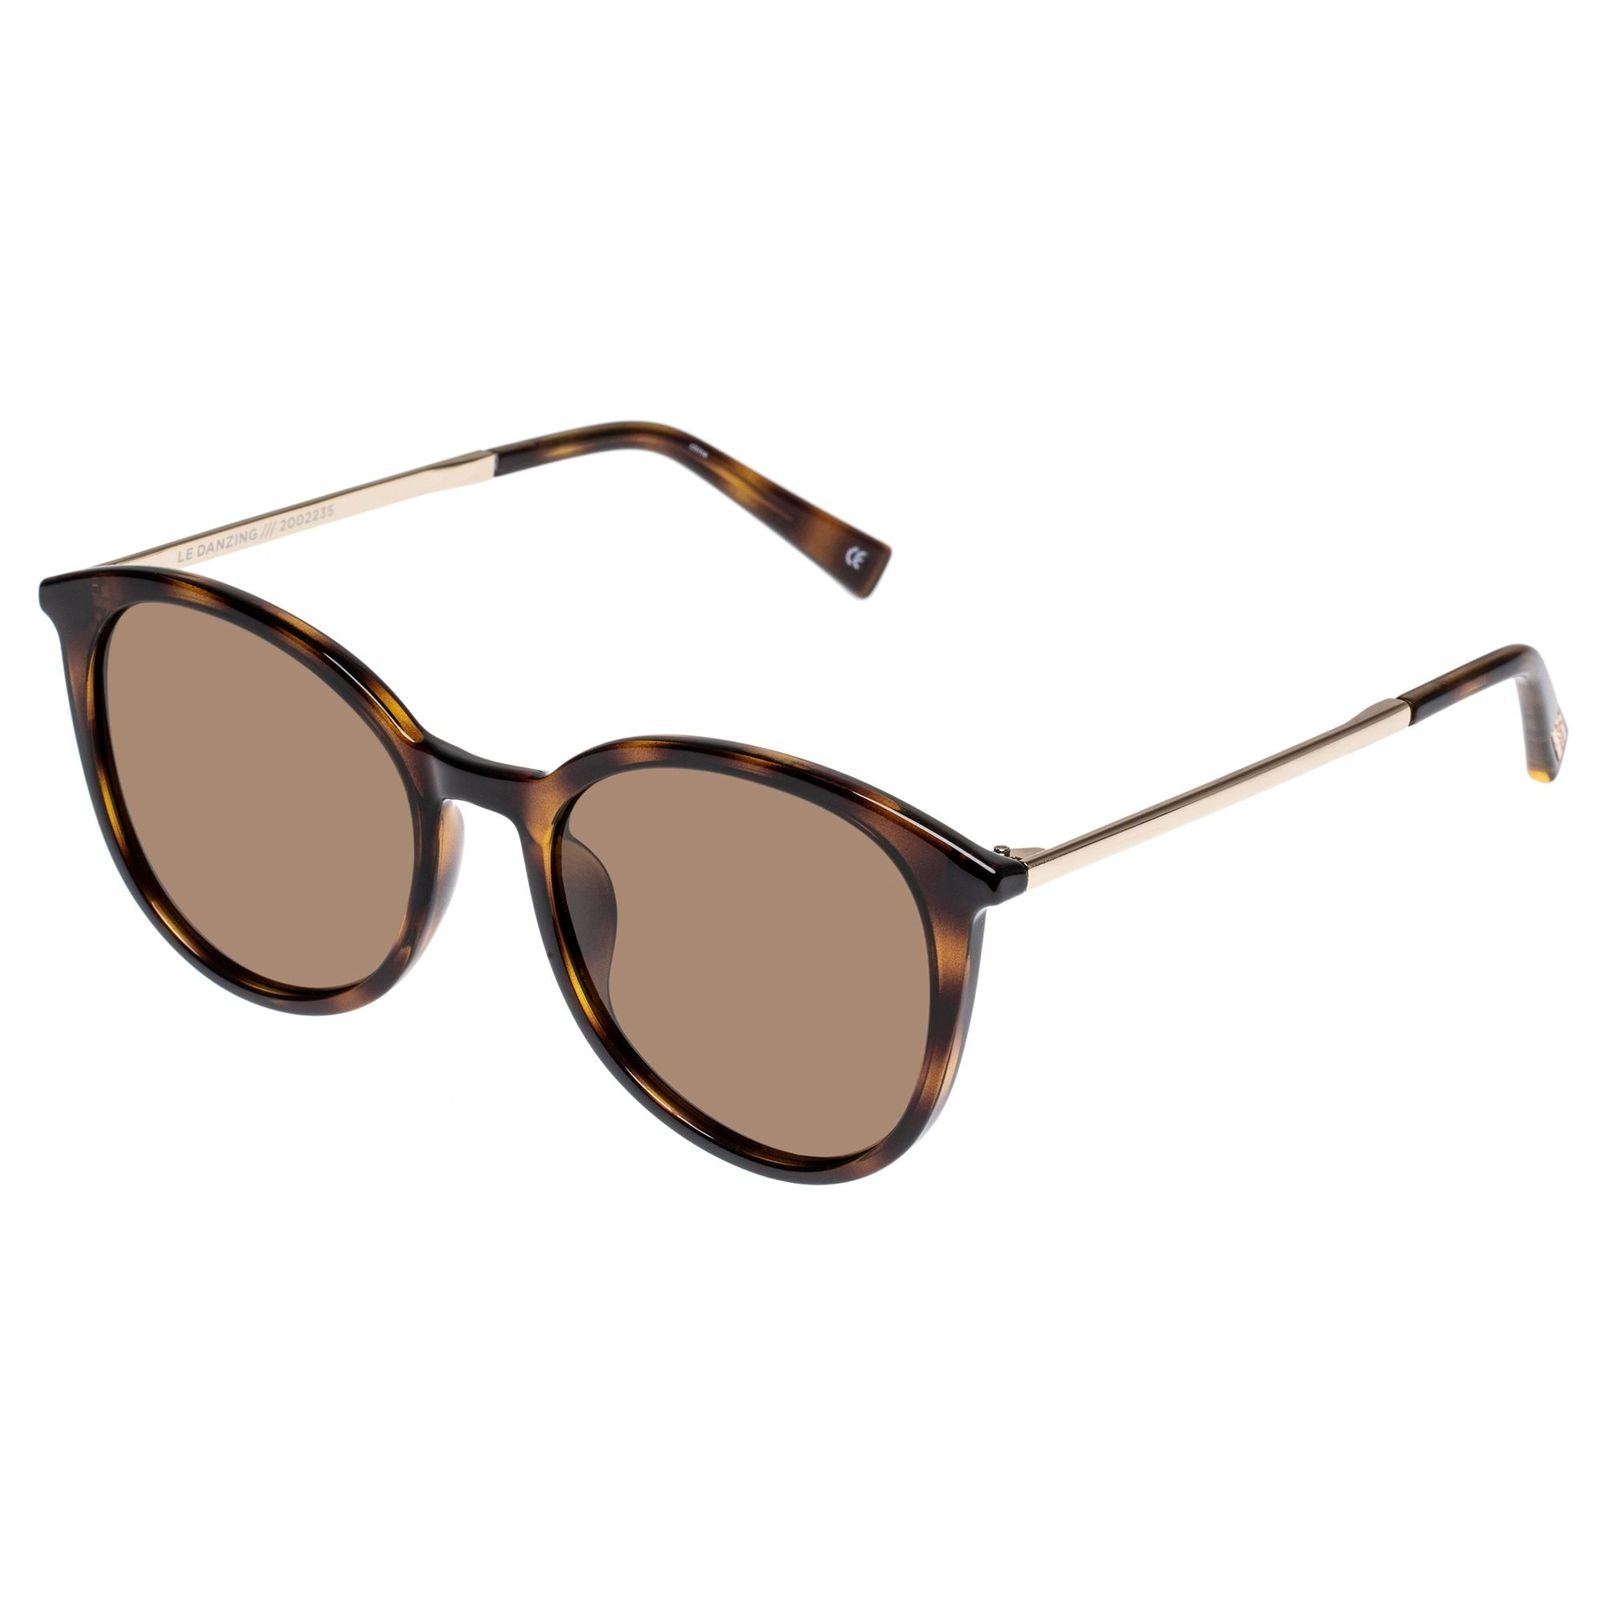 Le Danzing Sunglasses Tort and Gold